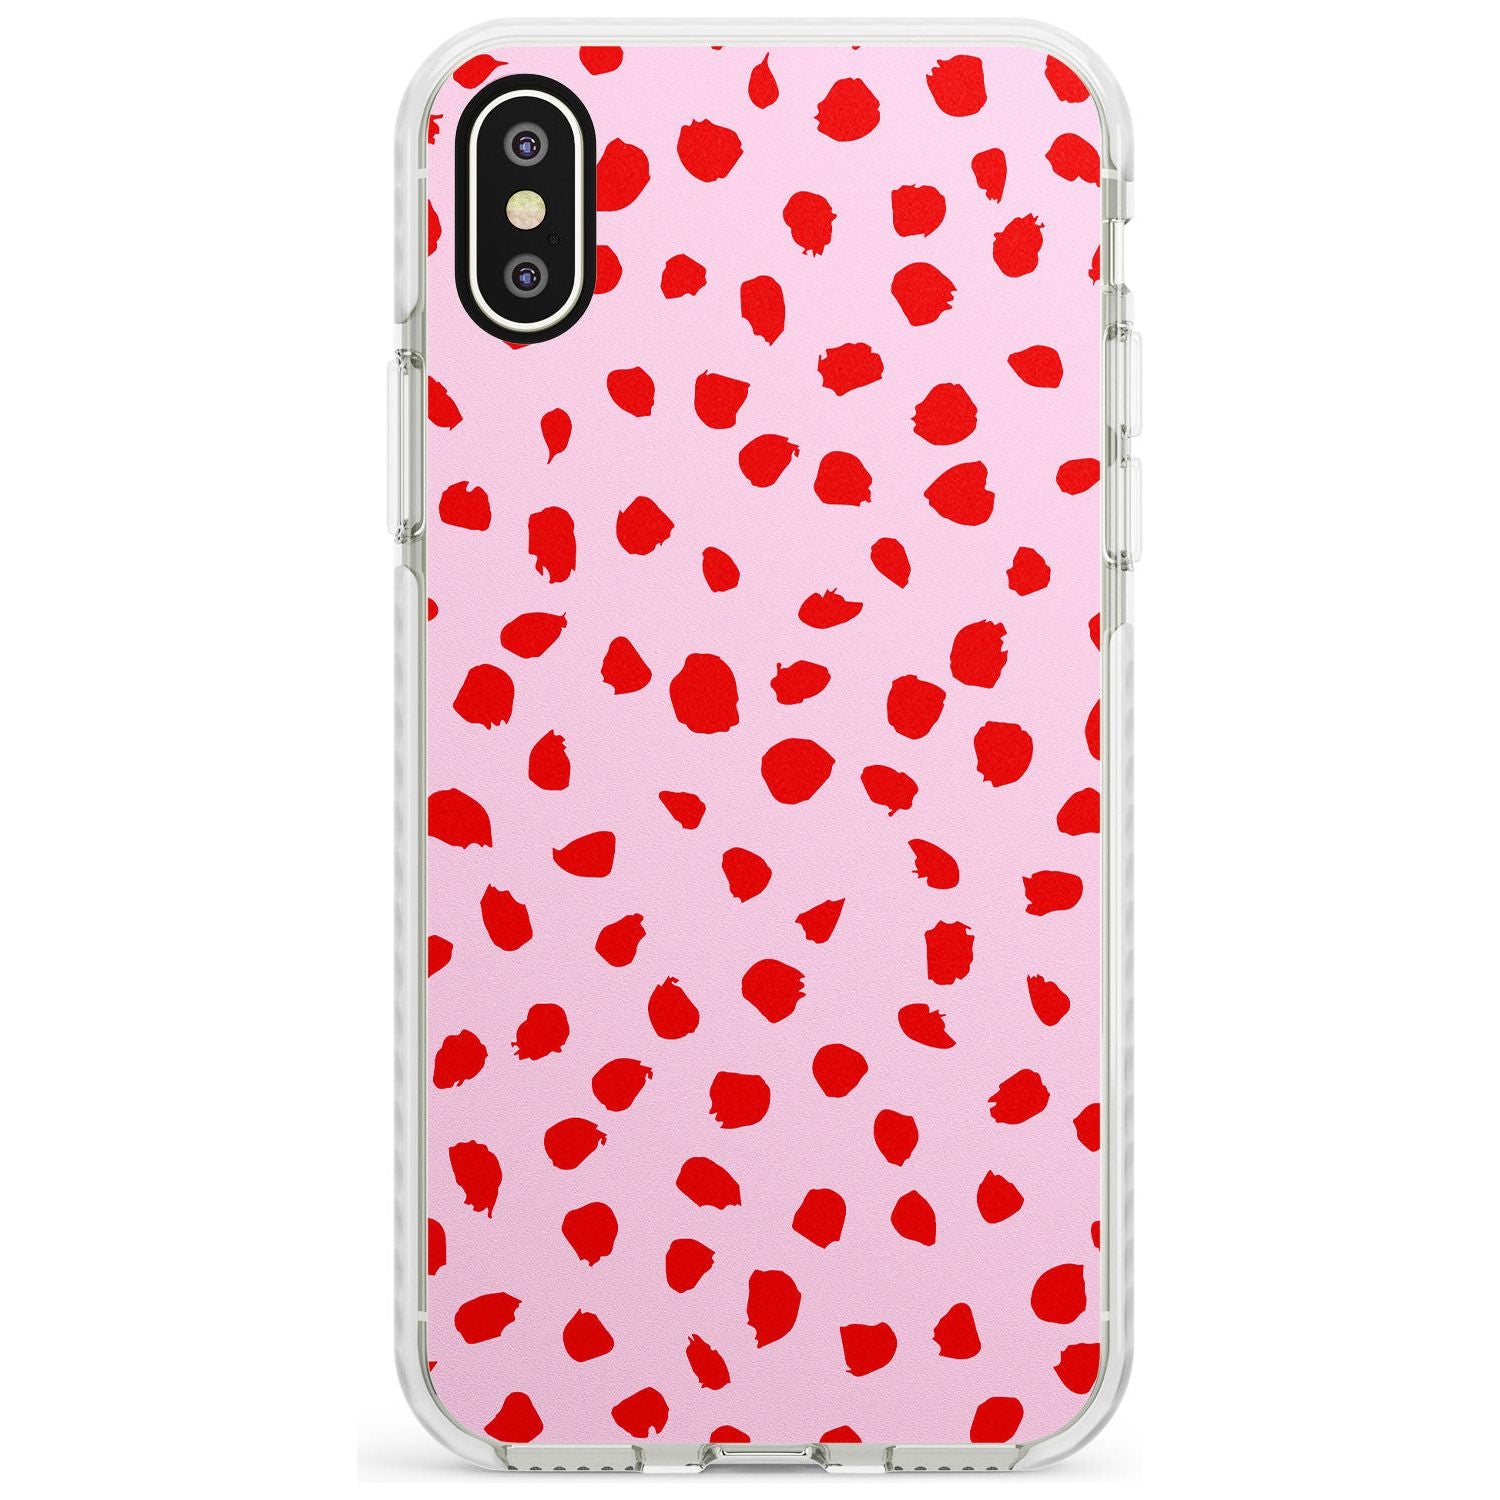 Red on Pink Dalmatian Polka Dot Spots Impact Phone Case for iPhone X XS Max XR